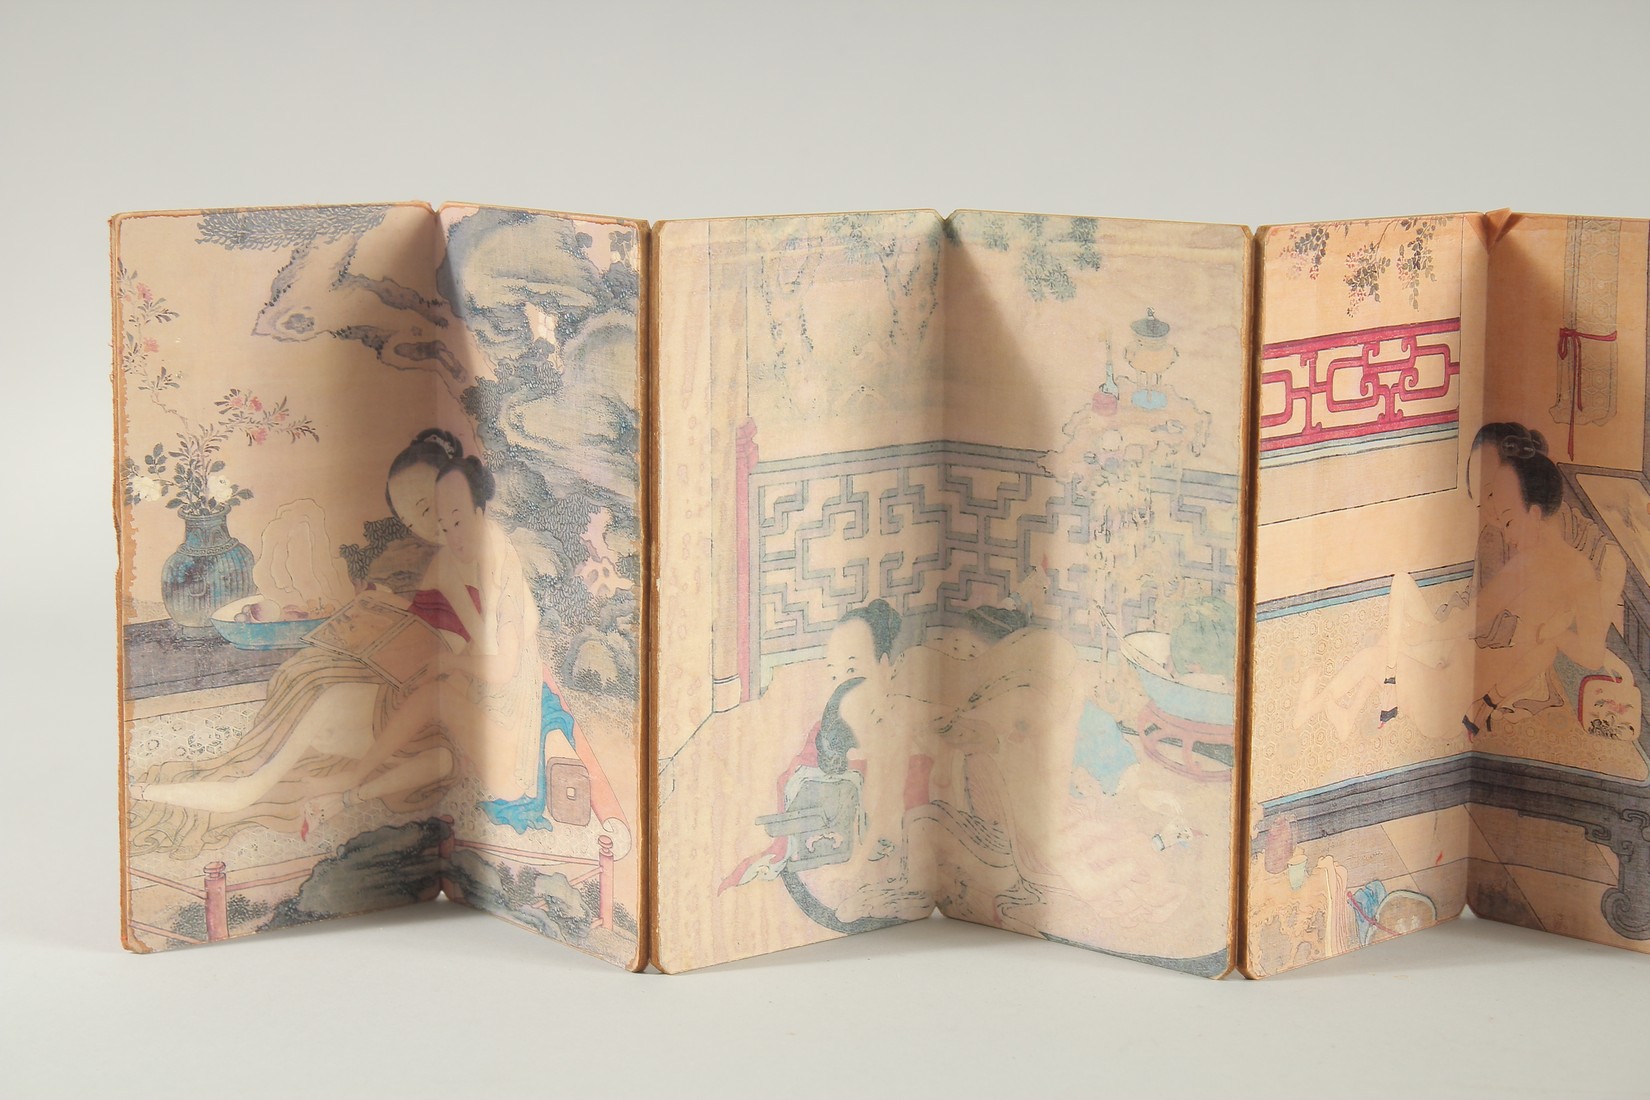 A CHINESE FOLDING EROTIC BOOK. - Image 2 of 3